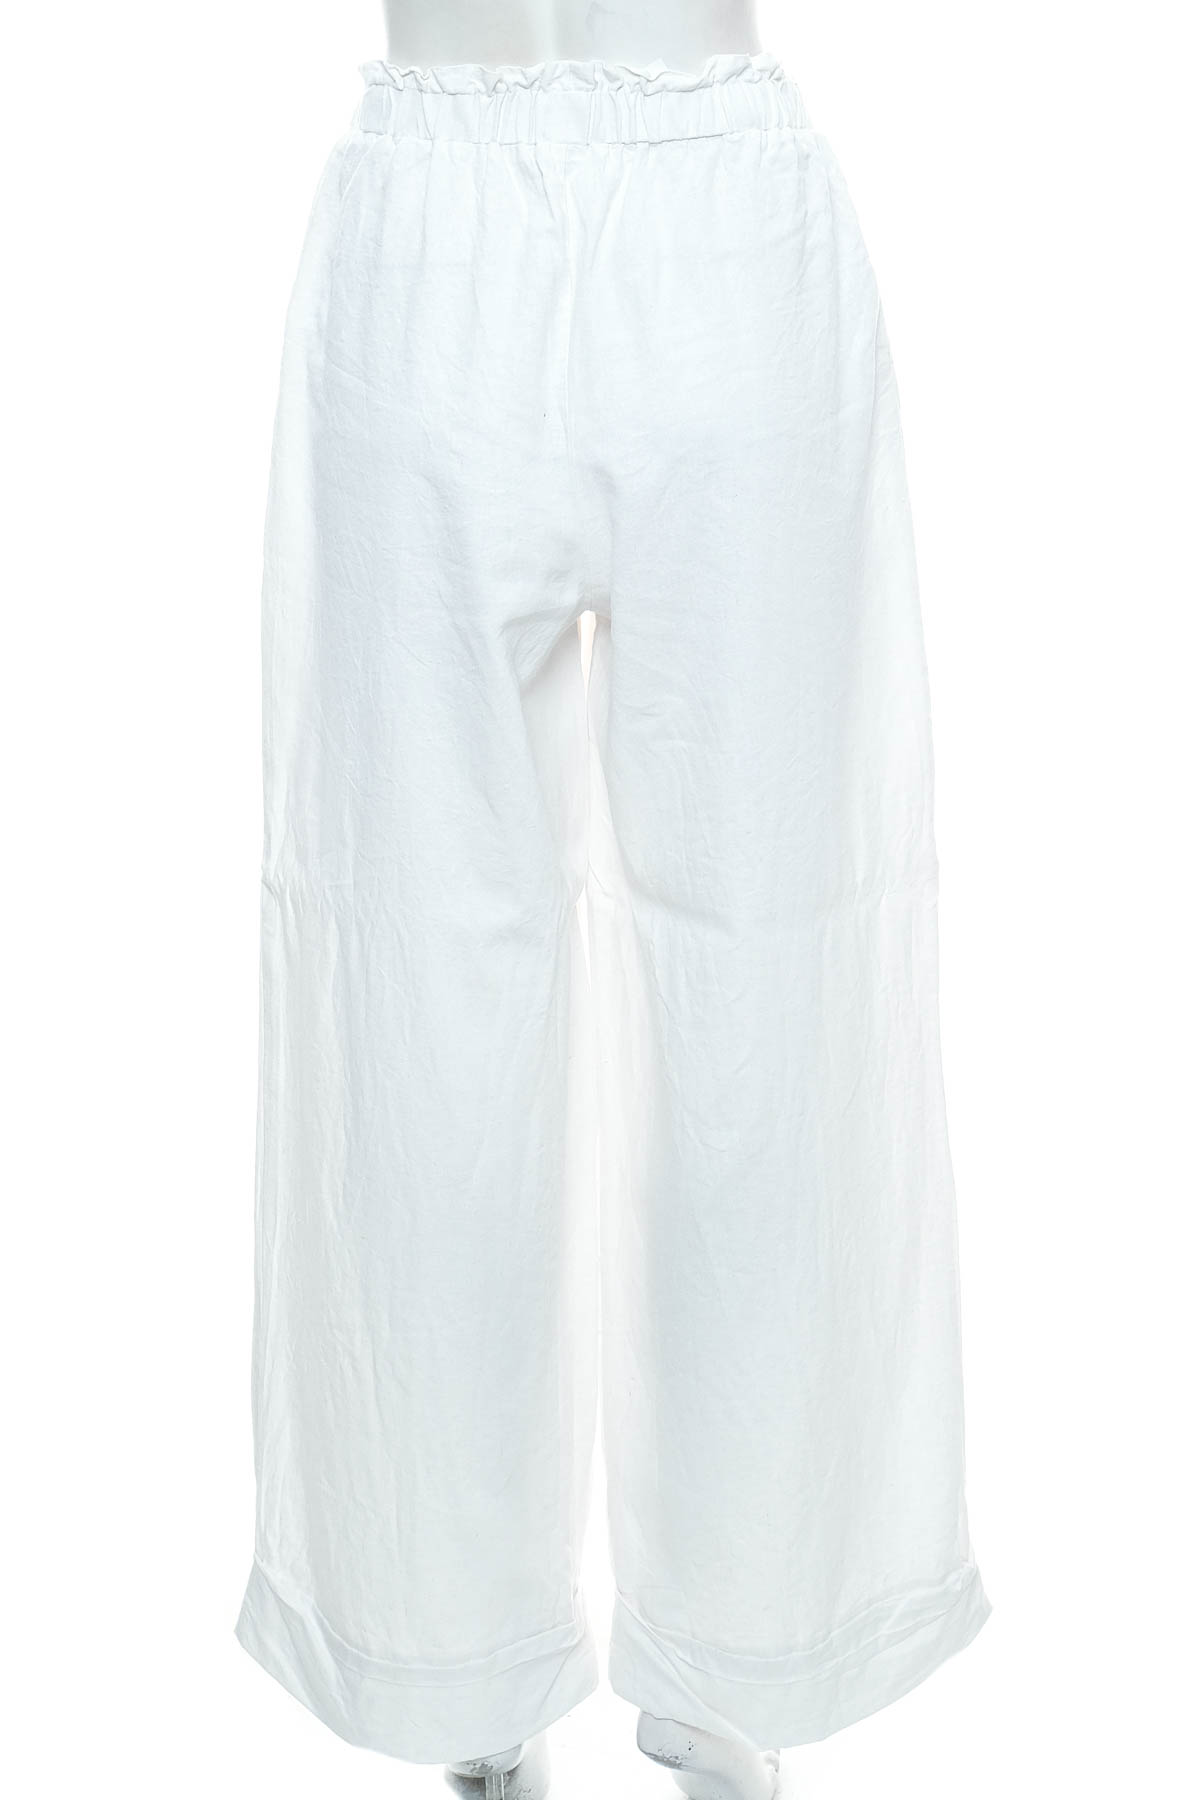 Women's trousers - Glassons - 1